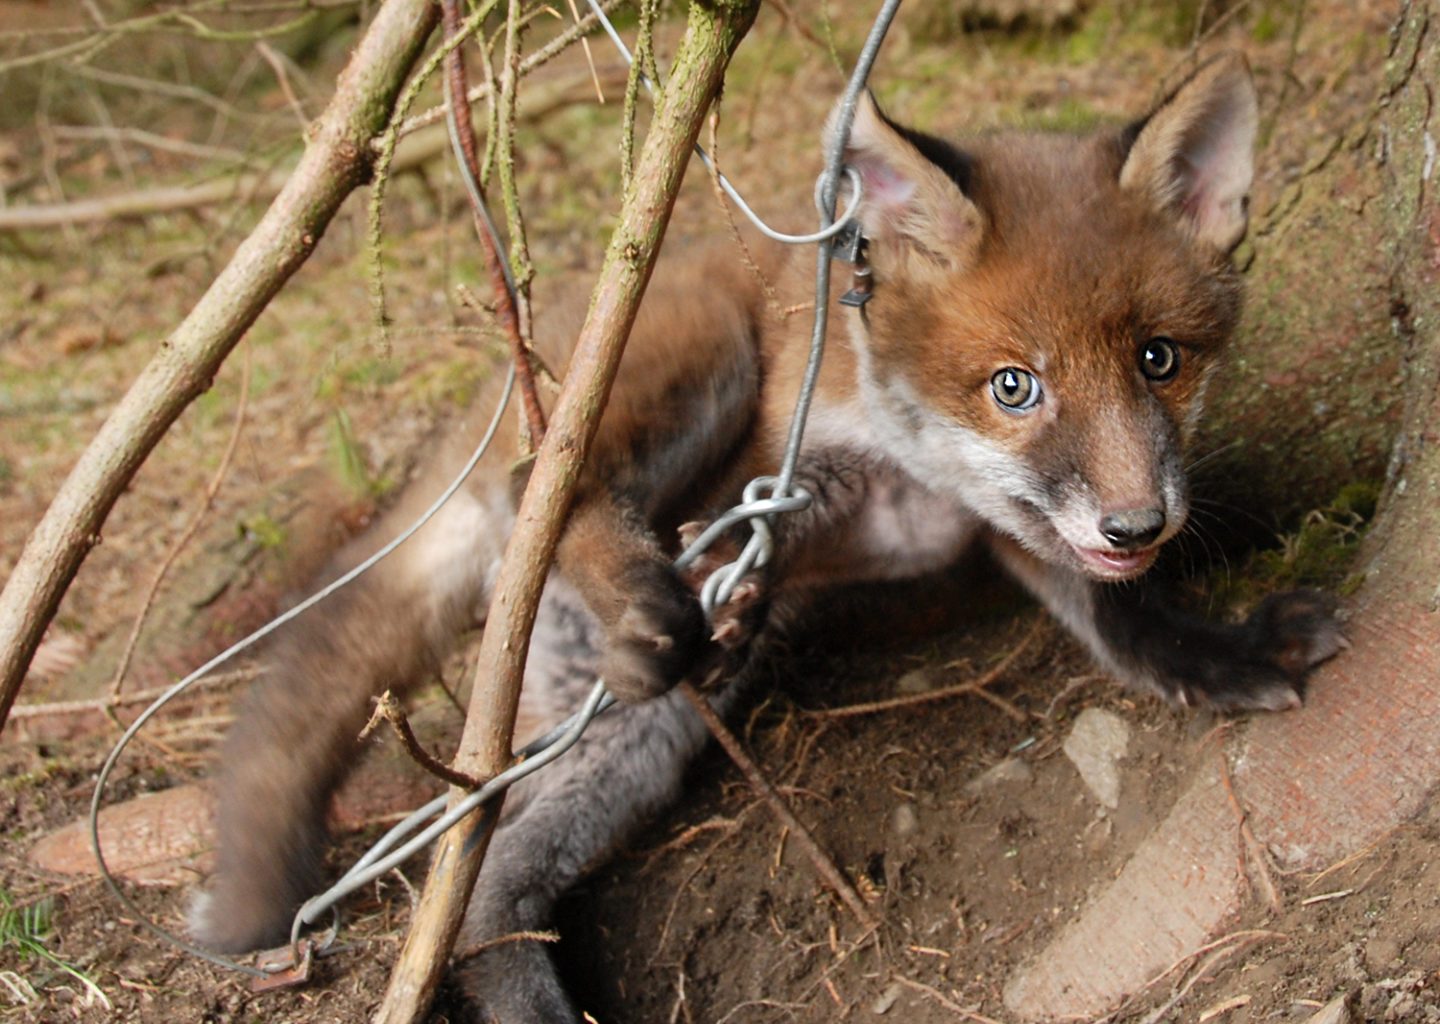 Snare traps killing and injuring pets and protected species, claims report 4